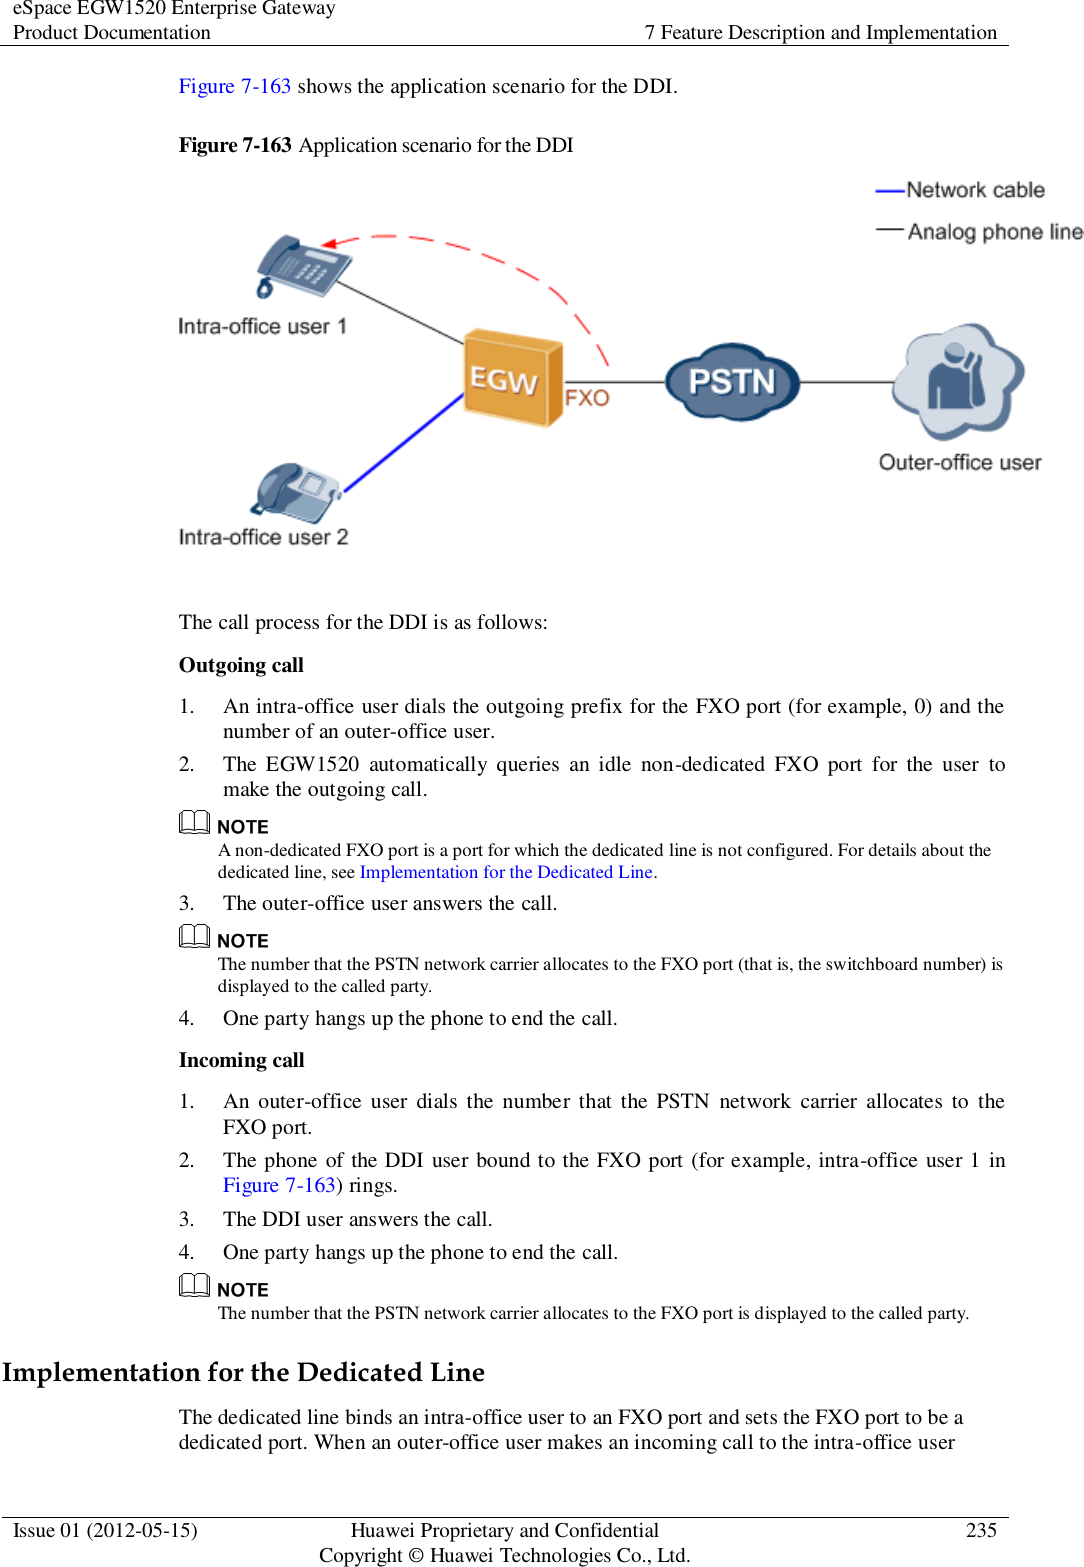 eSpace EGW1520 Enterprise Gateway Product Documentation 7 Feature Description and Implementation  Issue 01 (2012-05-15) Huawei Proprietary and Confidential                                     Copyright © Huawei Technologies Co., Ltd. 235  Figure 7-163 shows the application scenario for the DDI. Figure 7-163 Application scenario for the DDI   The call process for the DDI is as follows: Outgoing call 1. An intra-office user dials the outgoing prefix for the FXO port (for example, 0) and the number of an outer-office user. 2. The  EGW1520  automatically  queries  an  idle  non-dedicated  FXO  port  for  the  user  to make the outgoing call.  A non-dedicated FXO port is a port for which the dedicated line is not configured. For details about the dedicated line, see Implementation for the Dedicated Line. 3. The outer-office user answers the call.  The number that the PSTN network carrier allocates to the FXO port (that is, the switchboard number) is displayed to the called party. 4. One party hangs up the phone to end the call. Incoming call 1. An  outer-office  user  dials  the number  that  the PSTN  network  carrier  allocates to  the FXO port. 2. The phone of the DDI user bound to the FXO port (for example, intra-office user 1  in Figure 7-163) rings. 3. The DDI user answers the call. 4. One party hangs up the phone to end the call.  The number that the PSTN network carrier allocates to the FXO port is displayed to the called party. Implementation for the Dedicated Line The dedicated line binds an intra-office user to an FXO port and sets the FXO port to be a dedicated port. When an outer-office user makes an incoming call to the intra-office user 